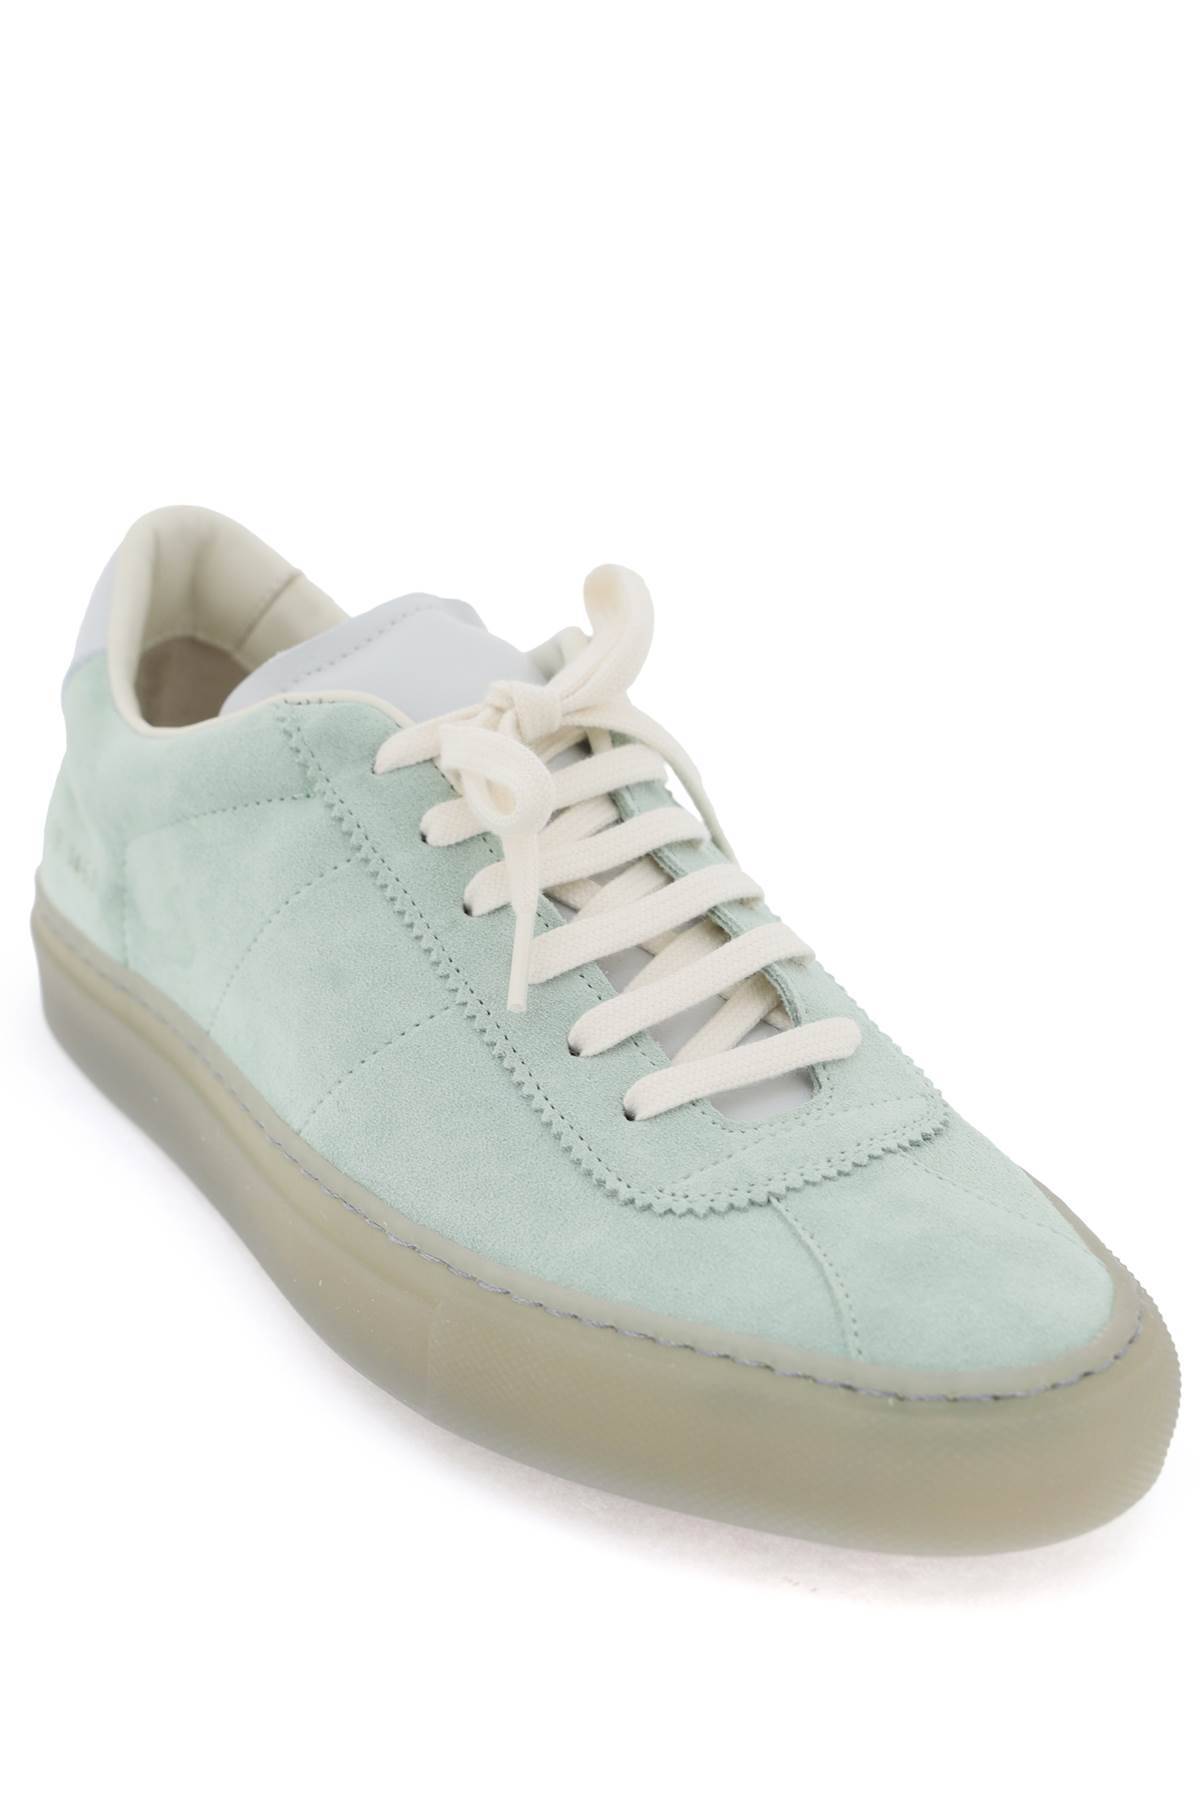 Shop Common Projects Suede Leather Sneakers For Men In Green